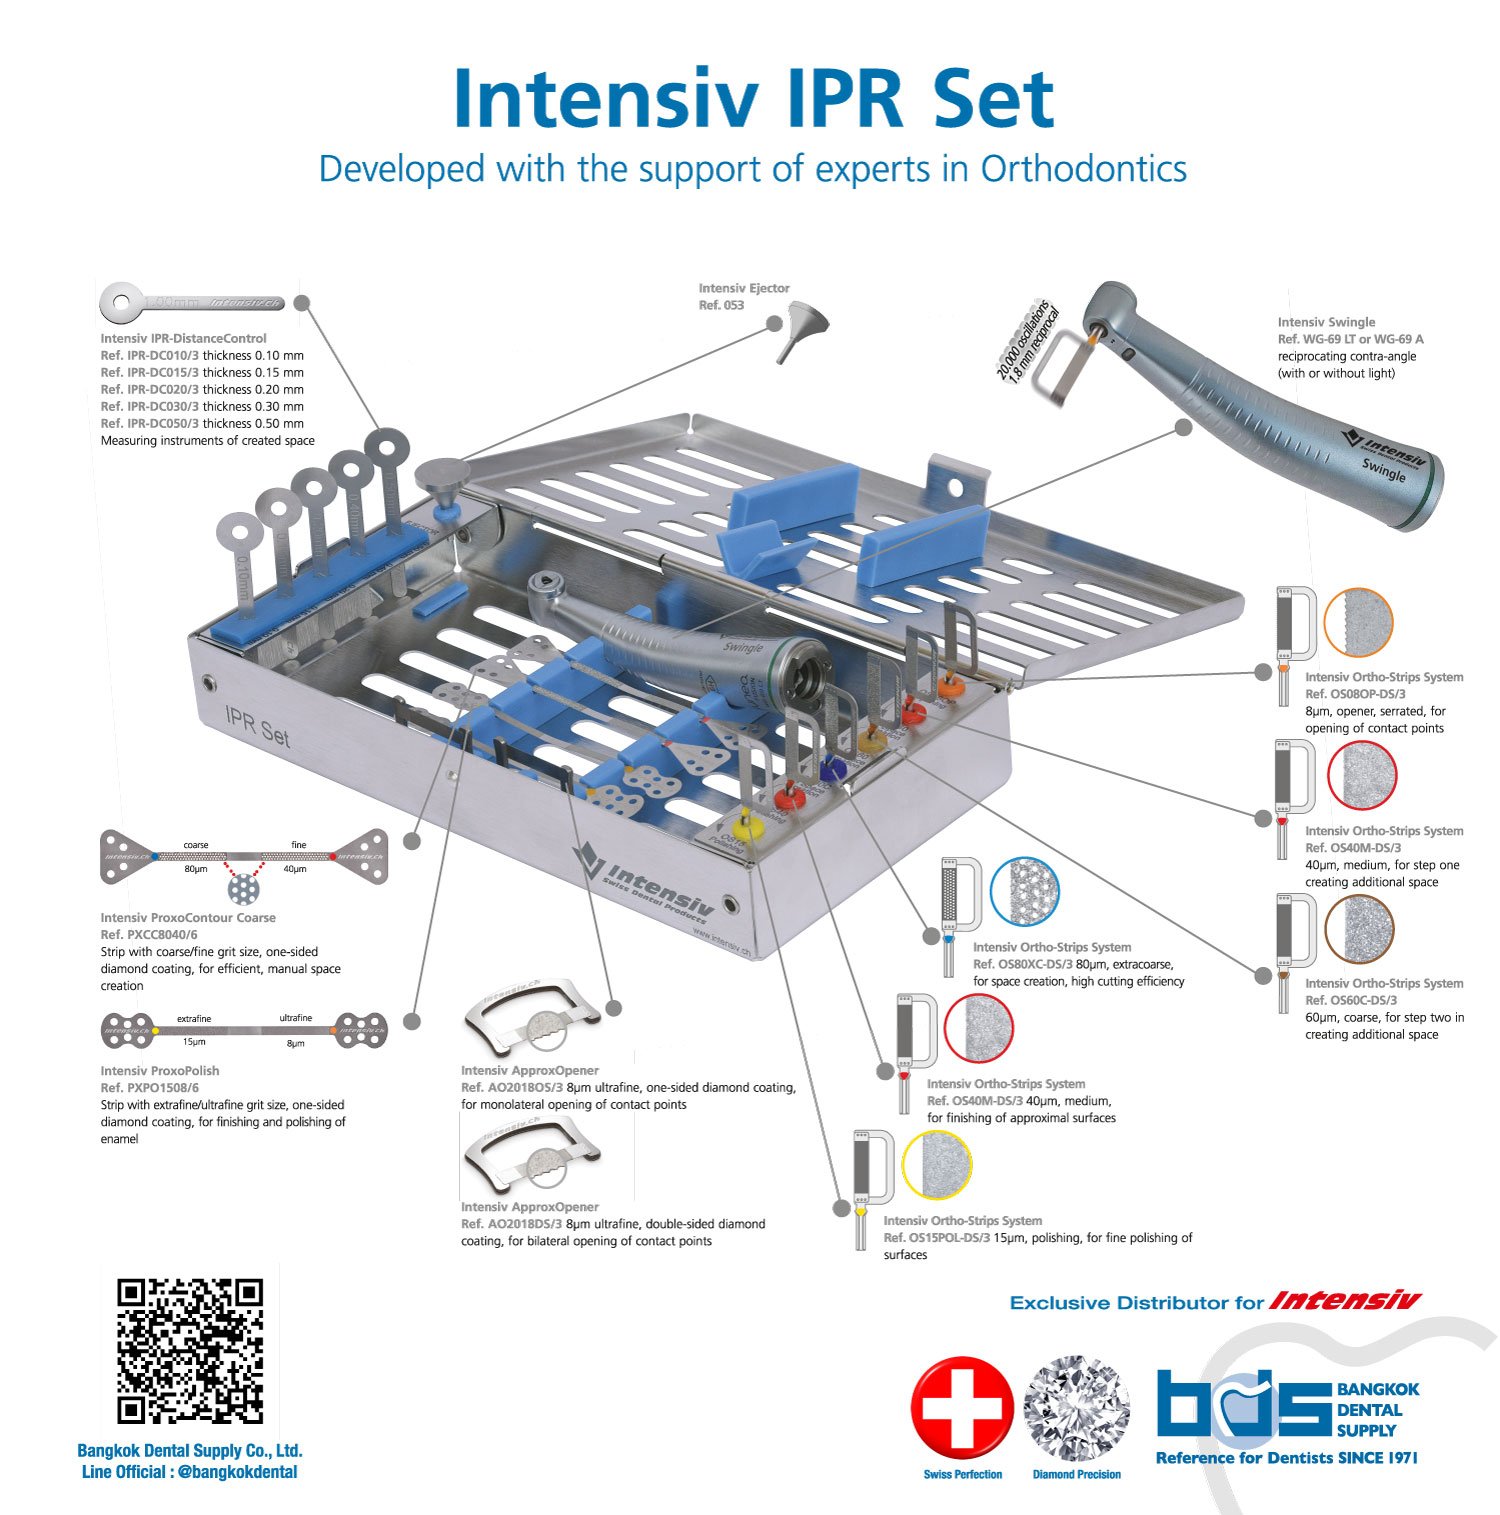 Intensiv IPR Set (developed from the support of experts in Orthodontics)